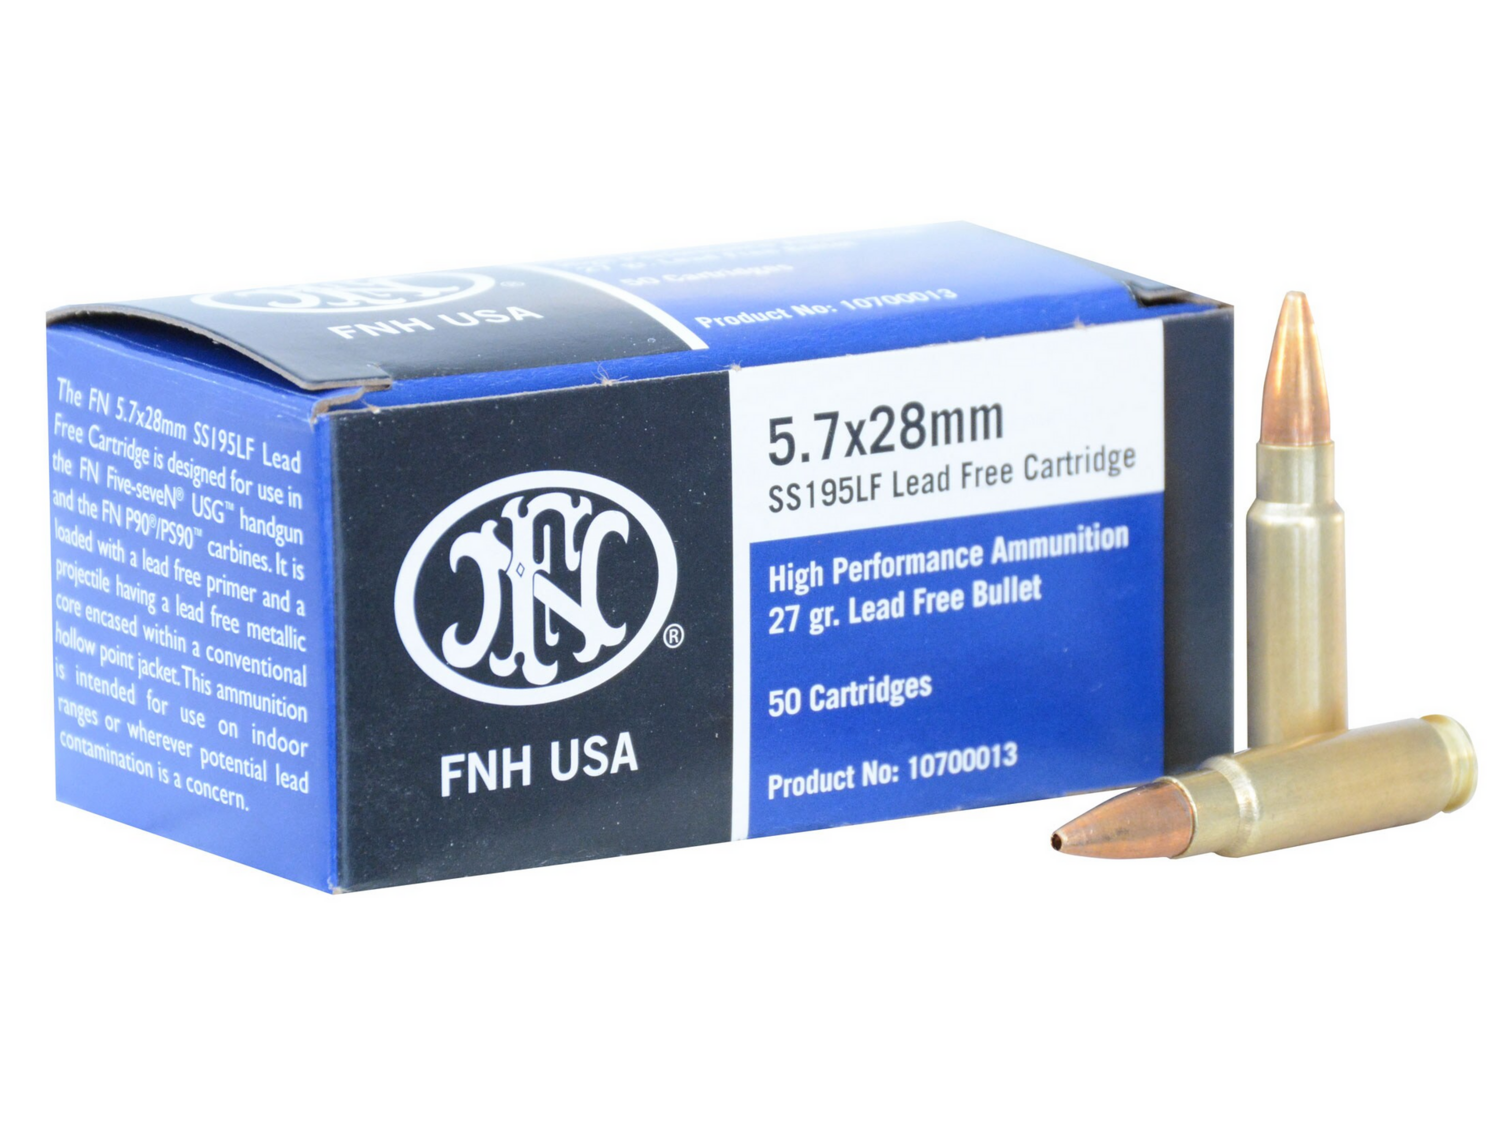 5.7x28mm SS195LF Lead Free LE - 2000 ROUNDS
FN America